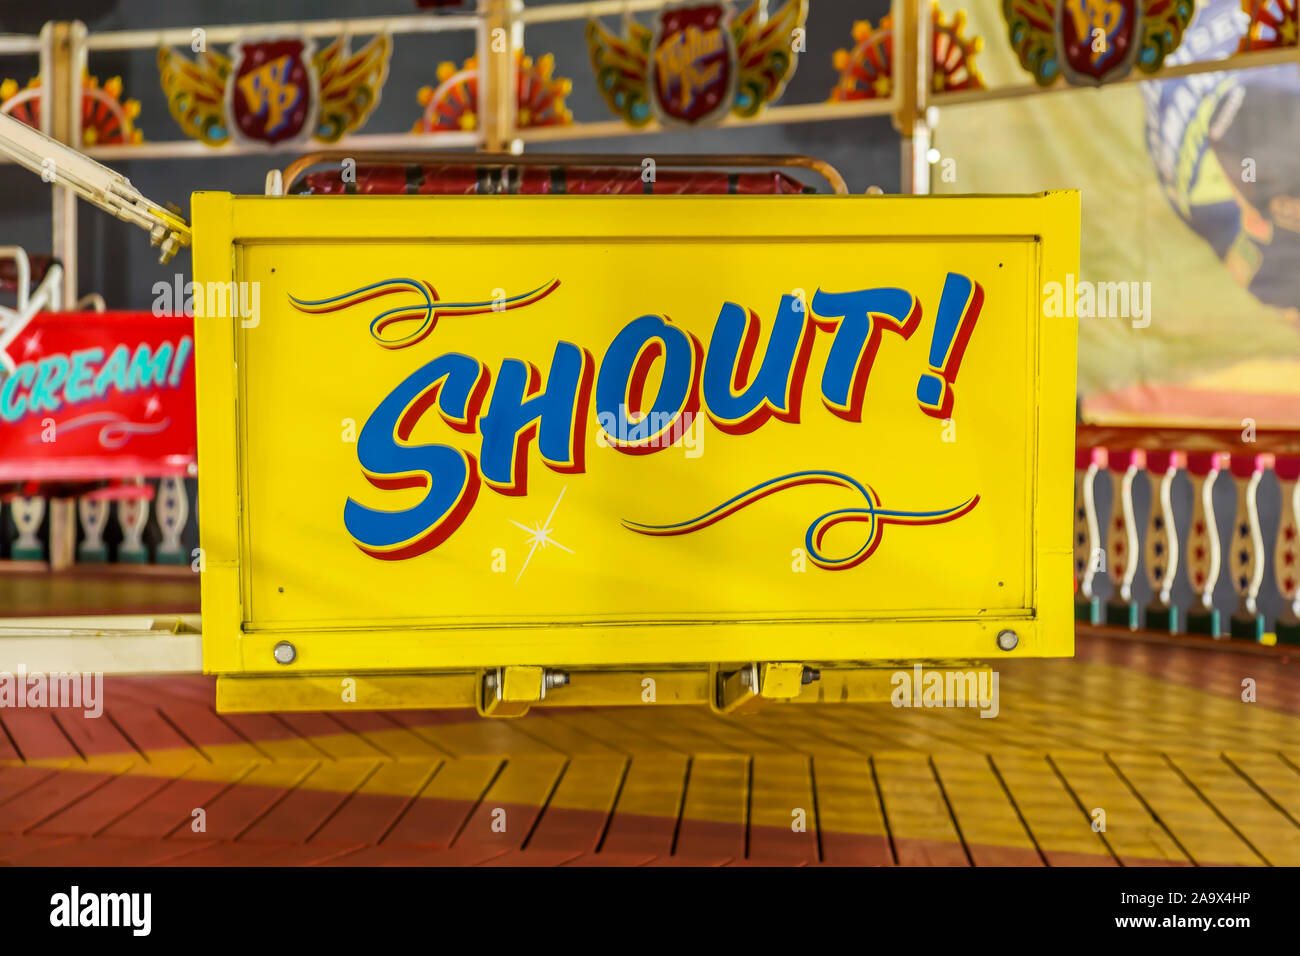 A brightly coloured hand painted fairground ride sign of the word Shout. Possible concept uses hearing loss, anger, activism, making yourself heard. Stock Photo